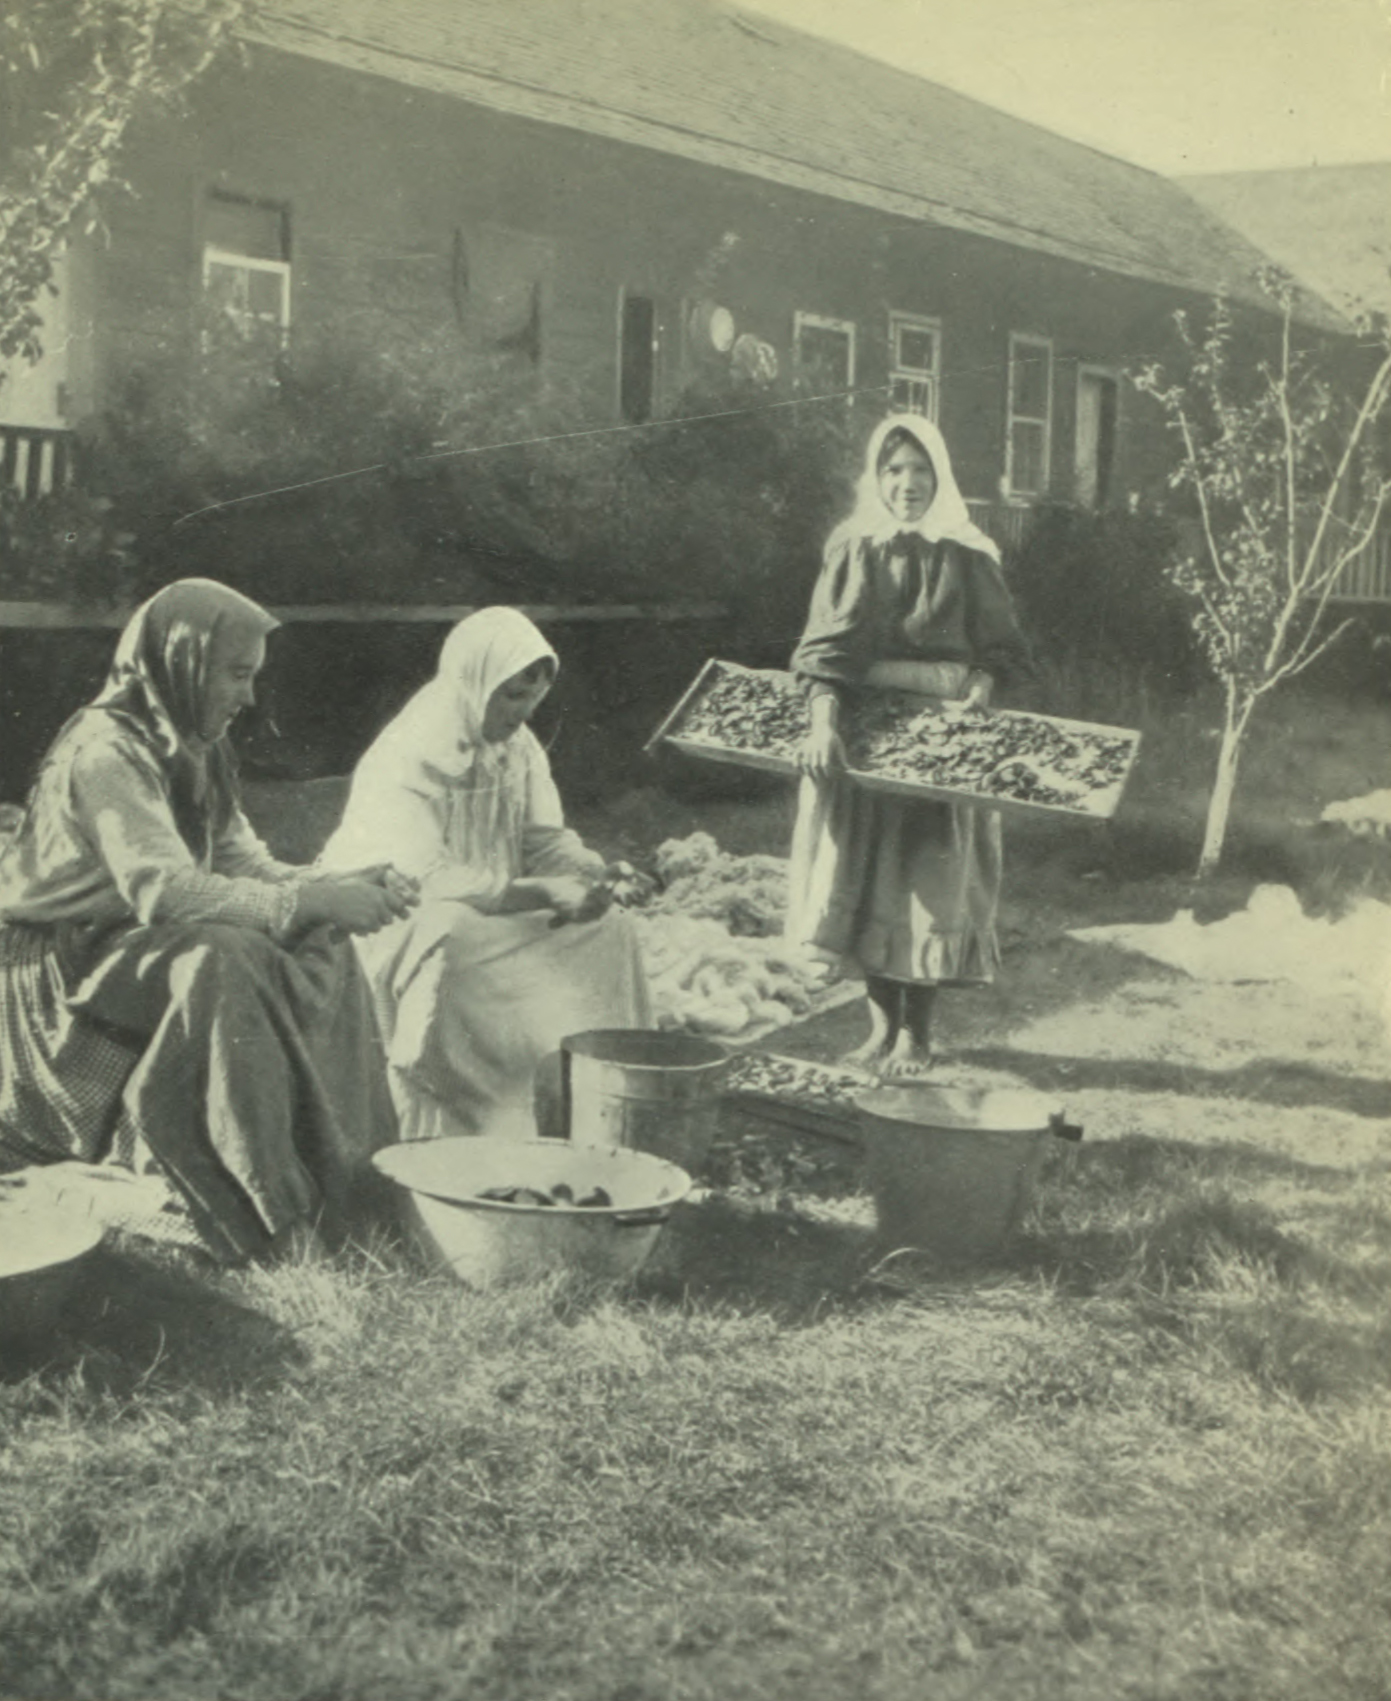 Women processing produce outdoors.